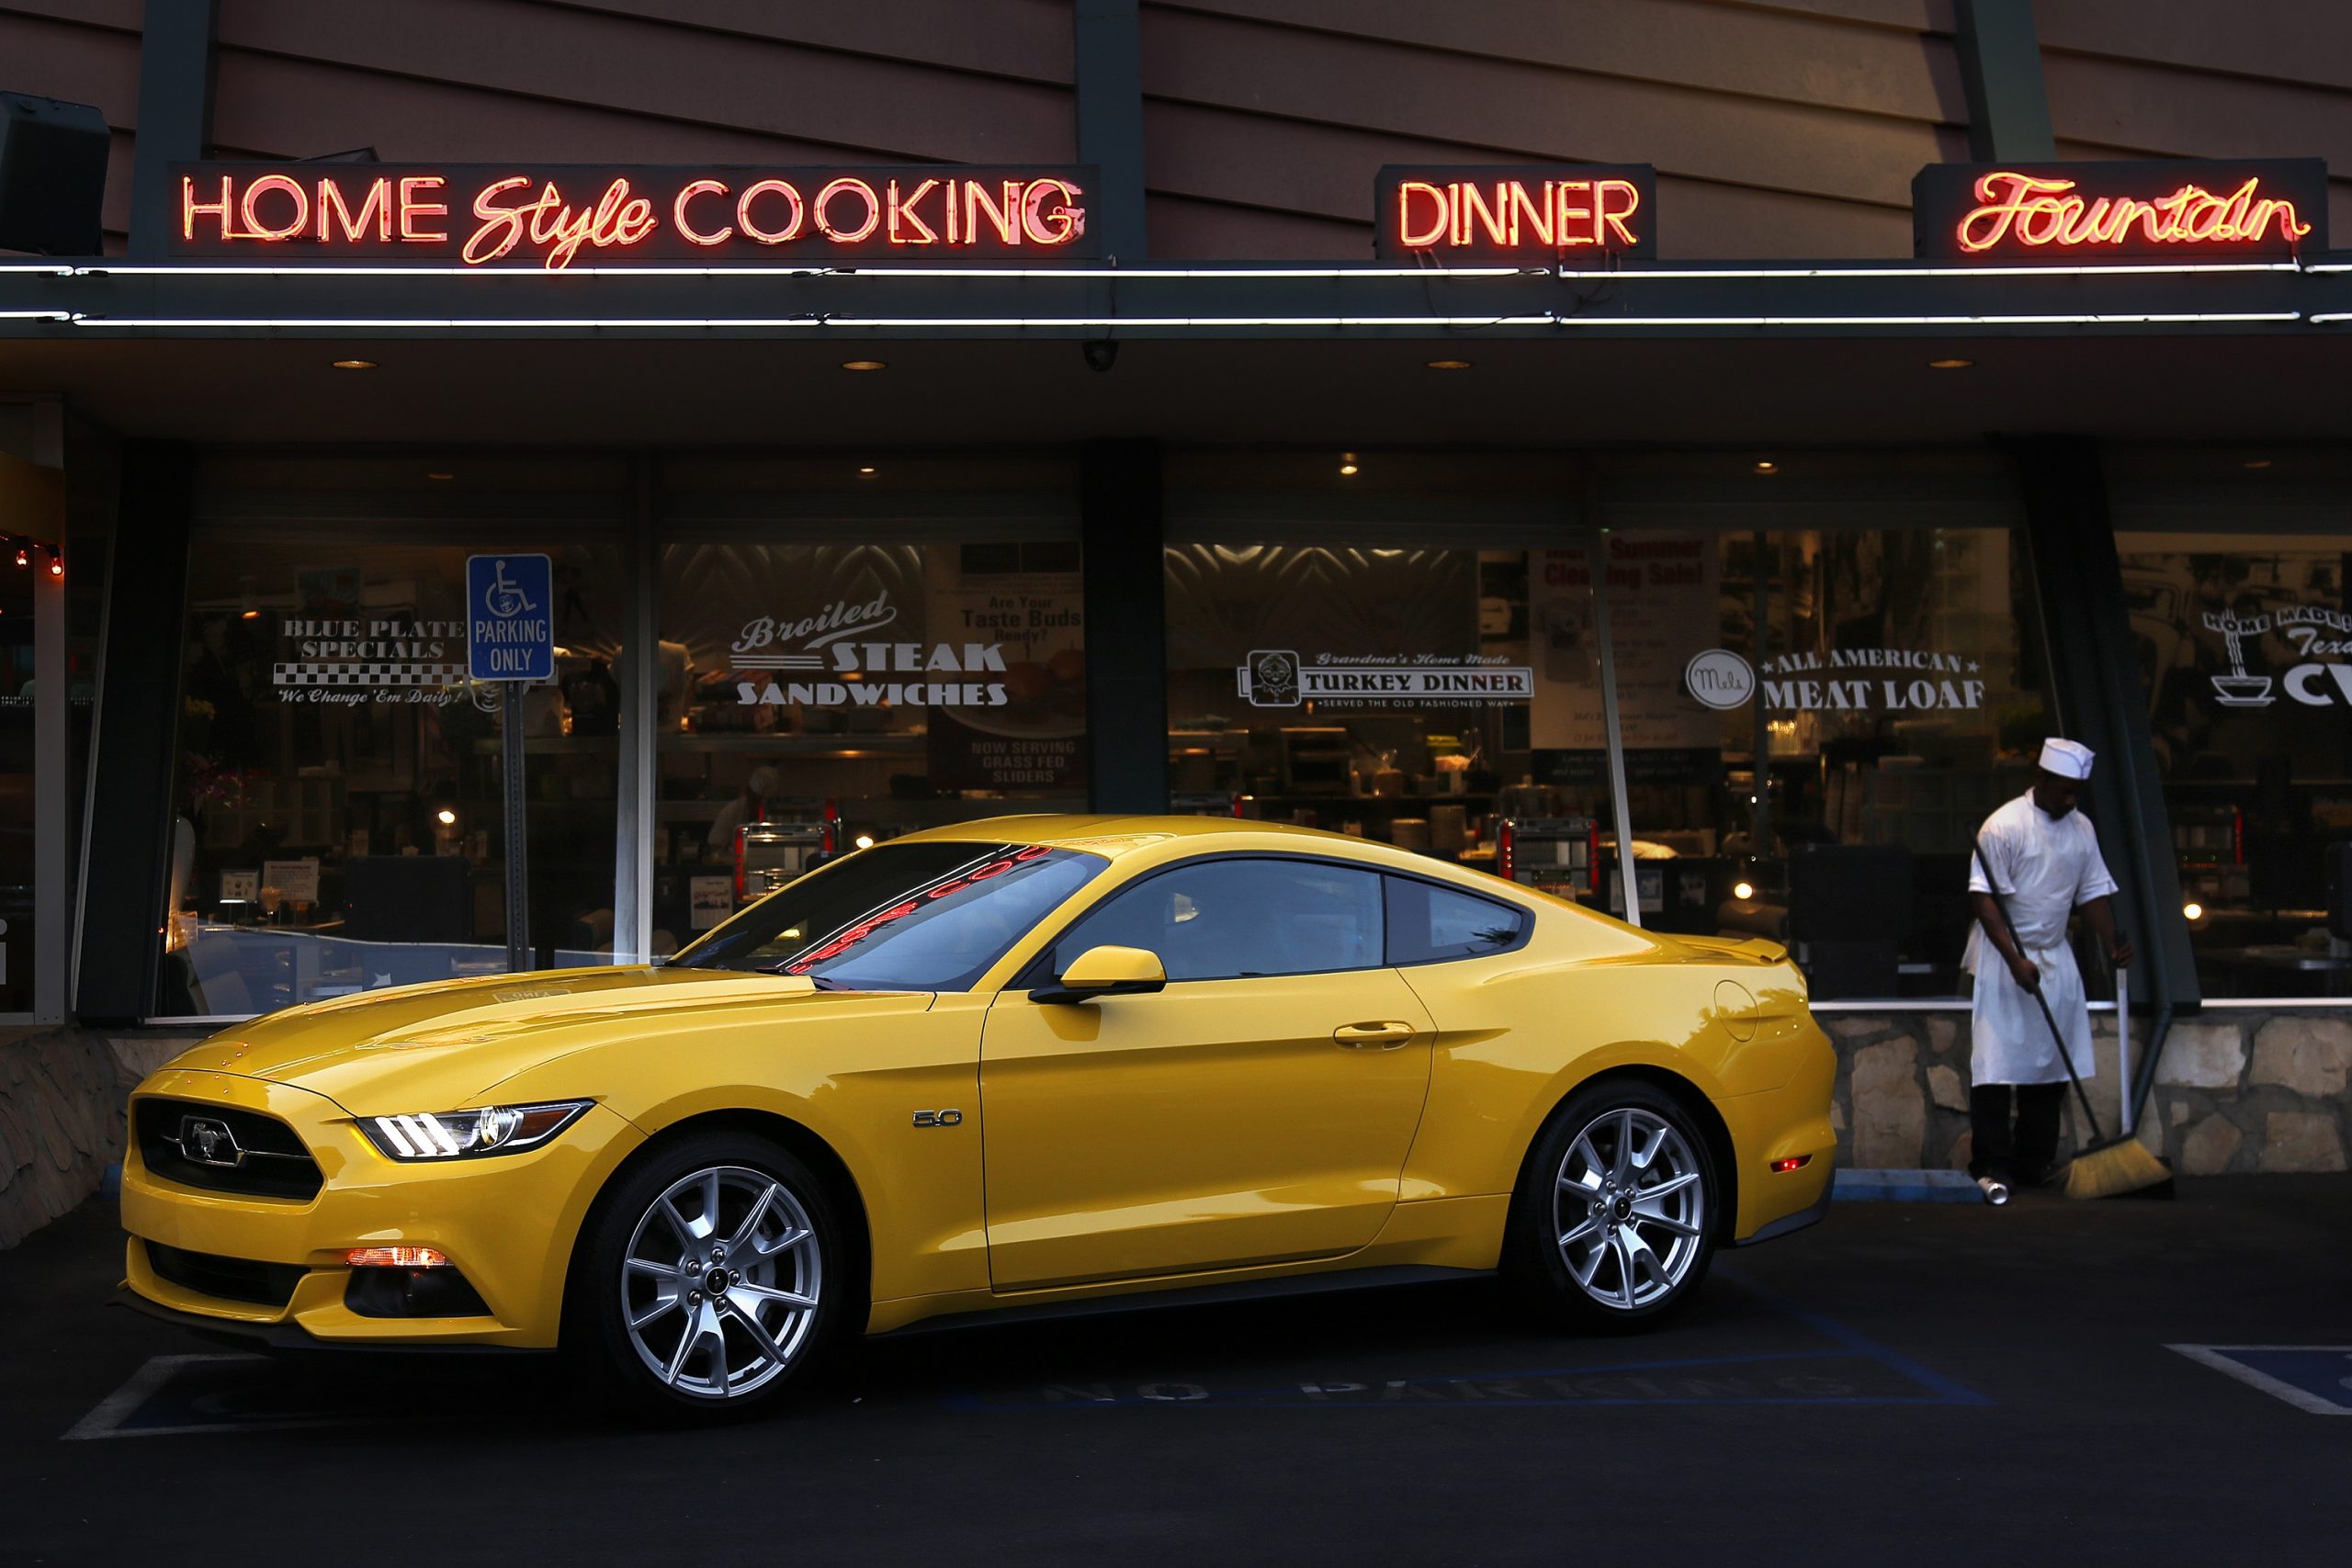 A yellow Ford Mustang sits outside a cafe, shot from the front 3/4 angle